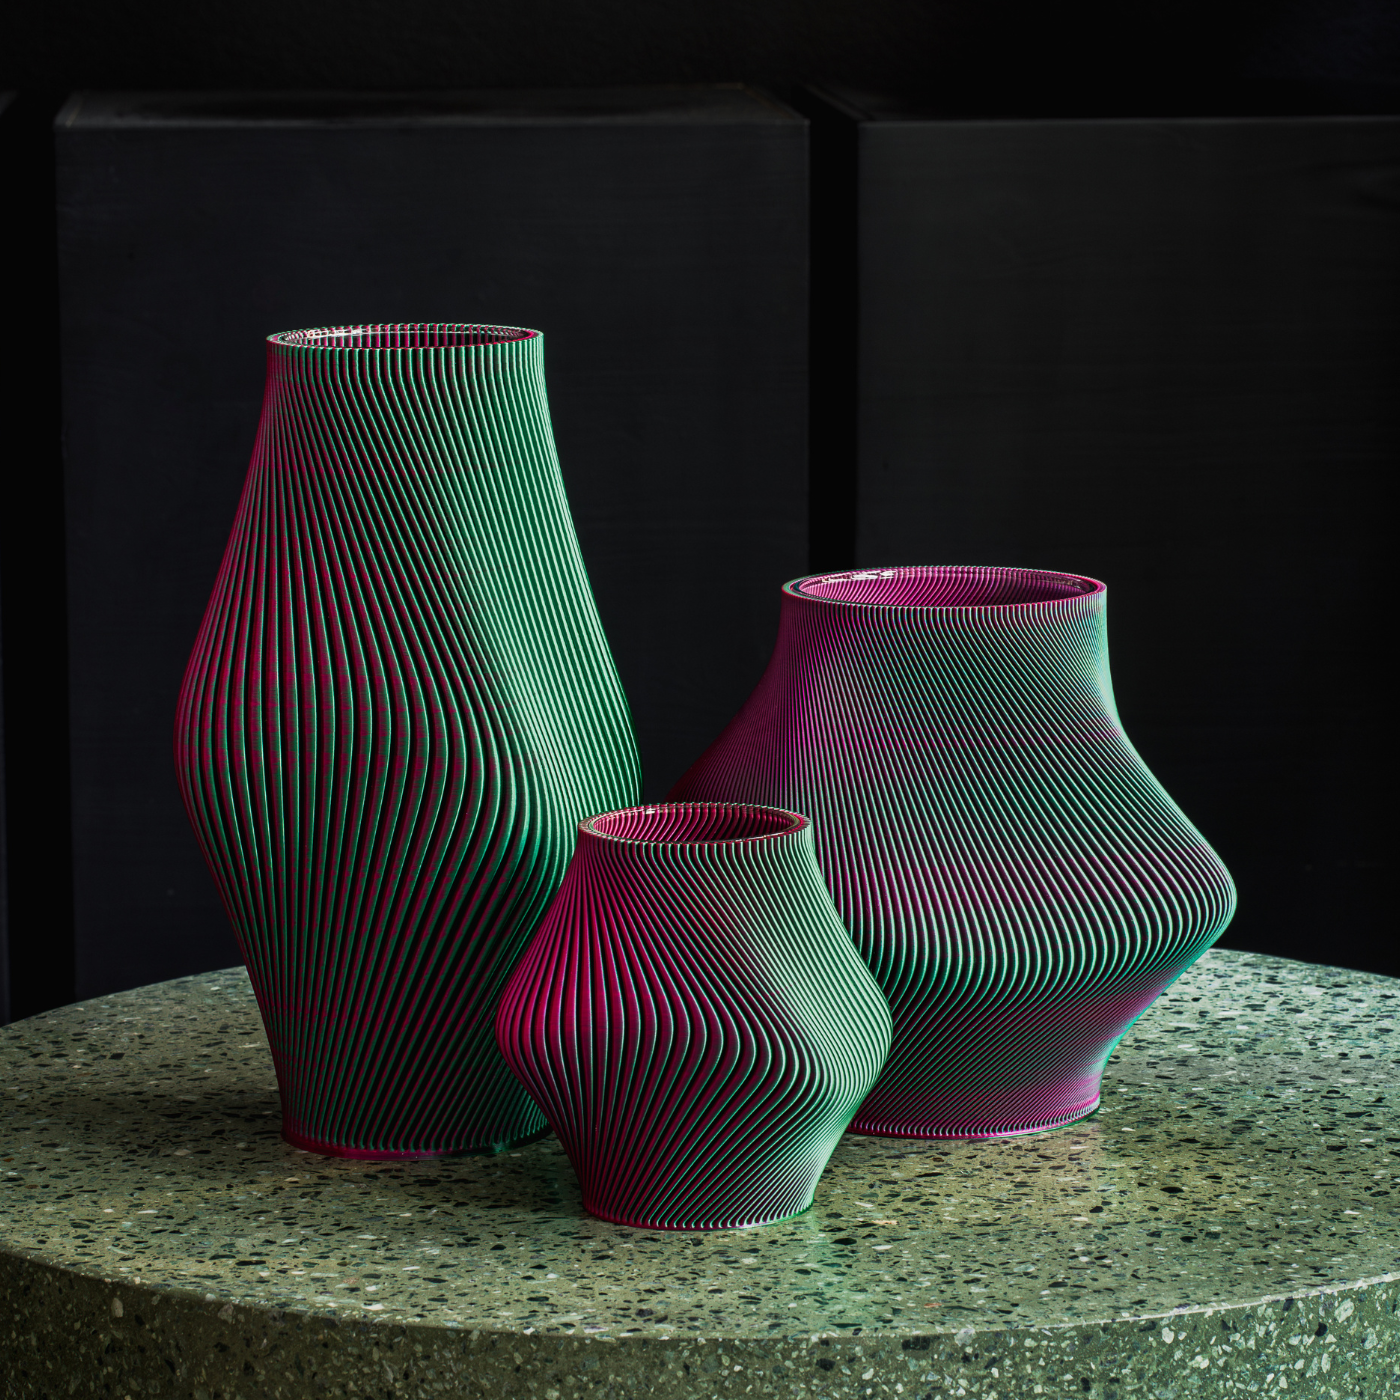 A lifestyle group shot of three 3D printed vases of different sizes on a stone round table.